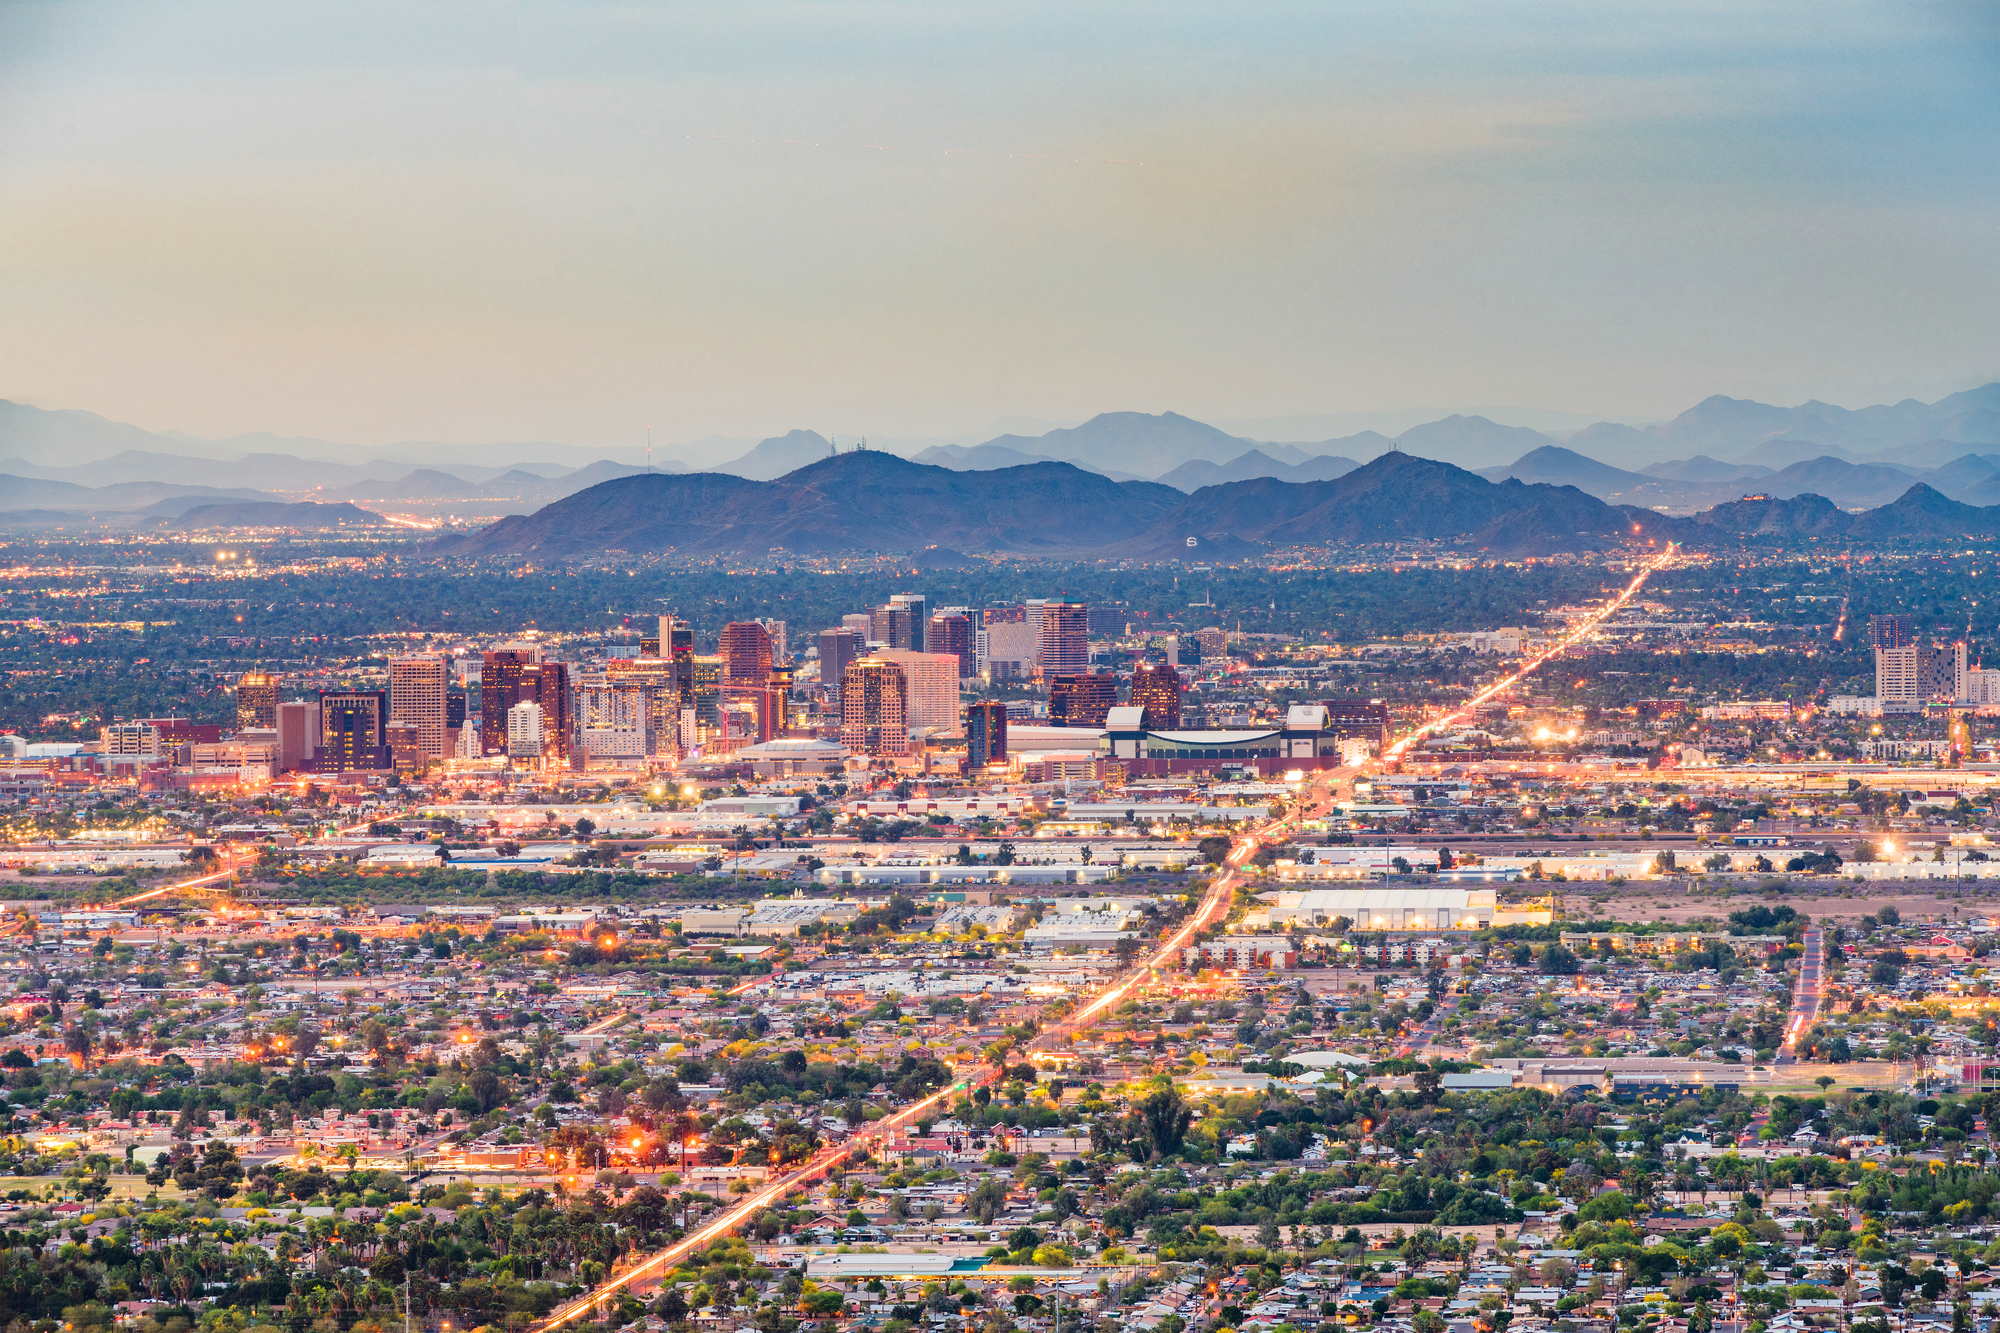 Top Six Upcoming Events in Phoenix for 2023